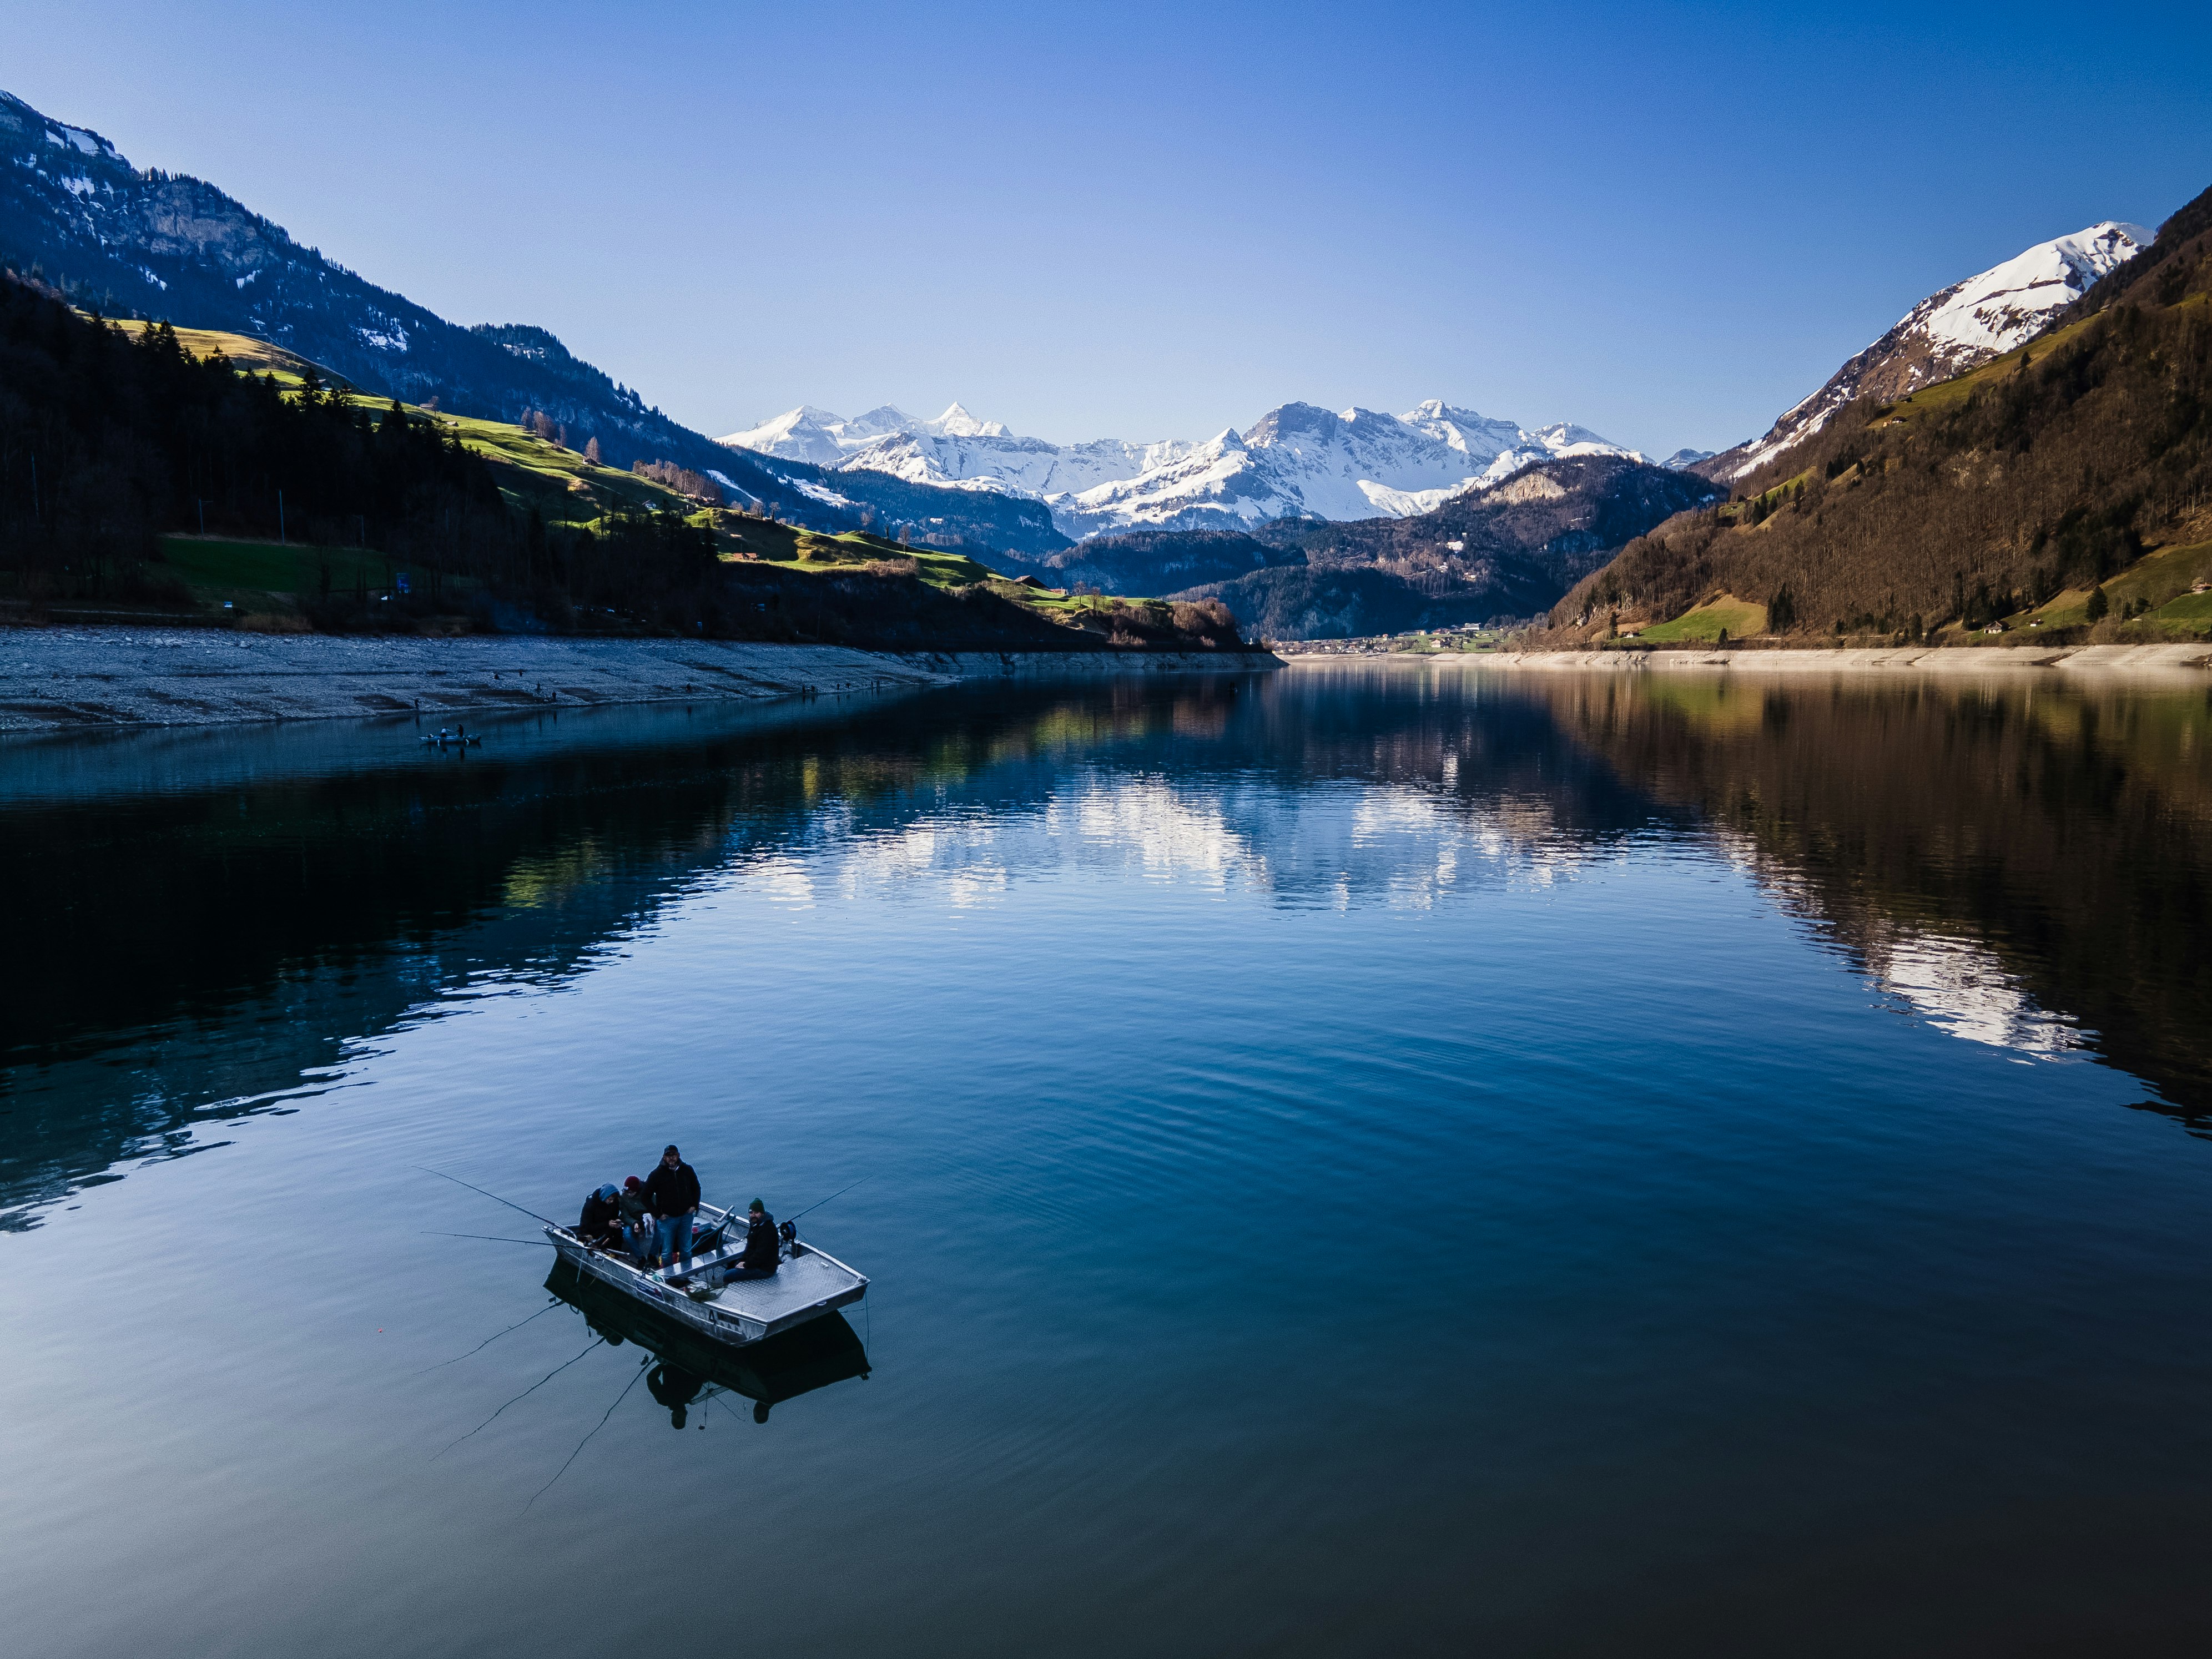 person sitting on boat on lake during daytime